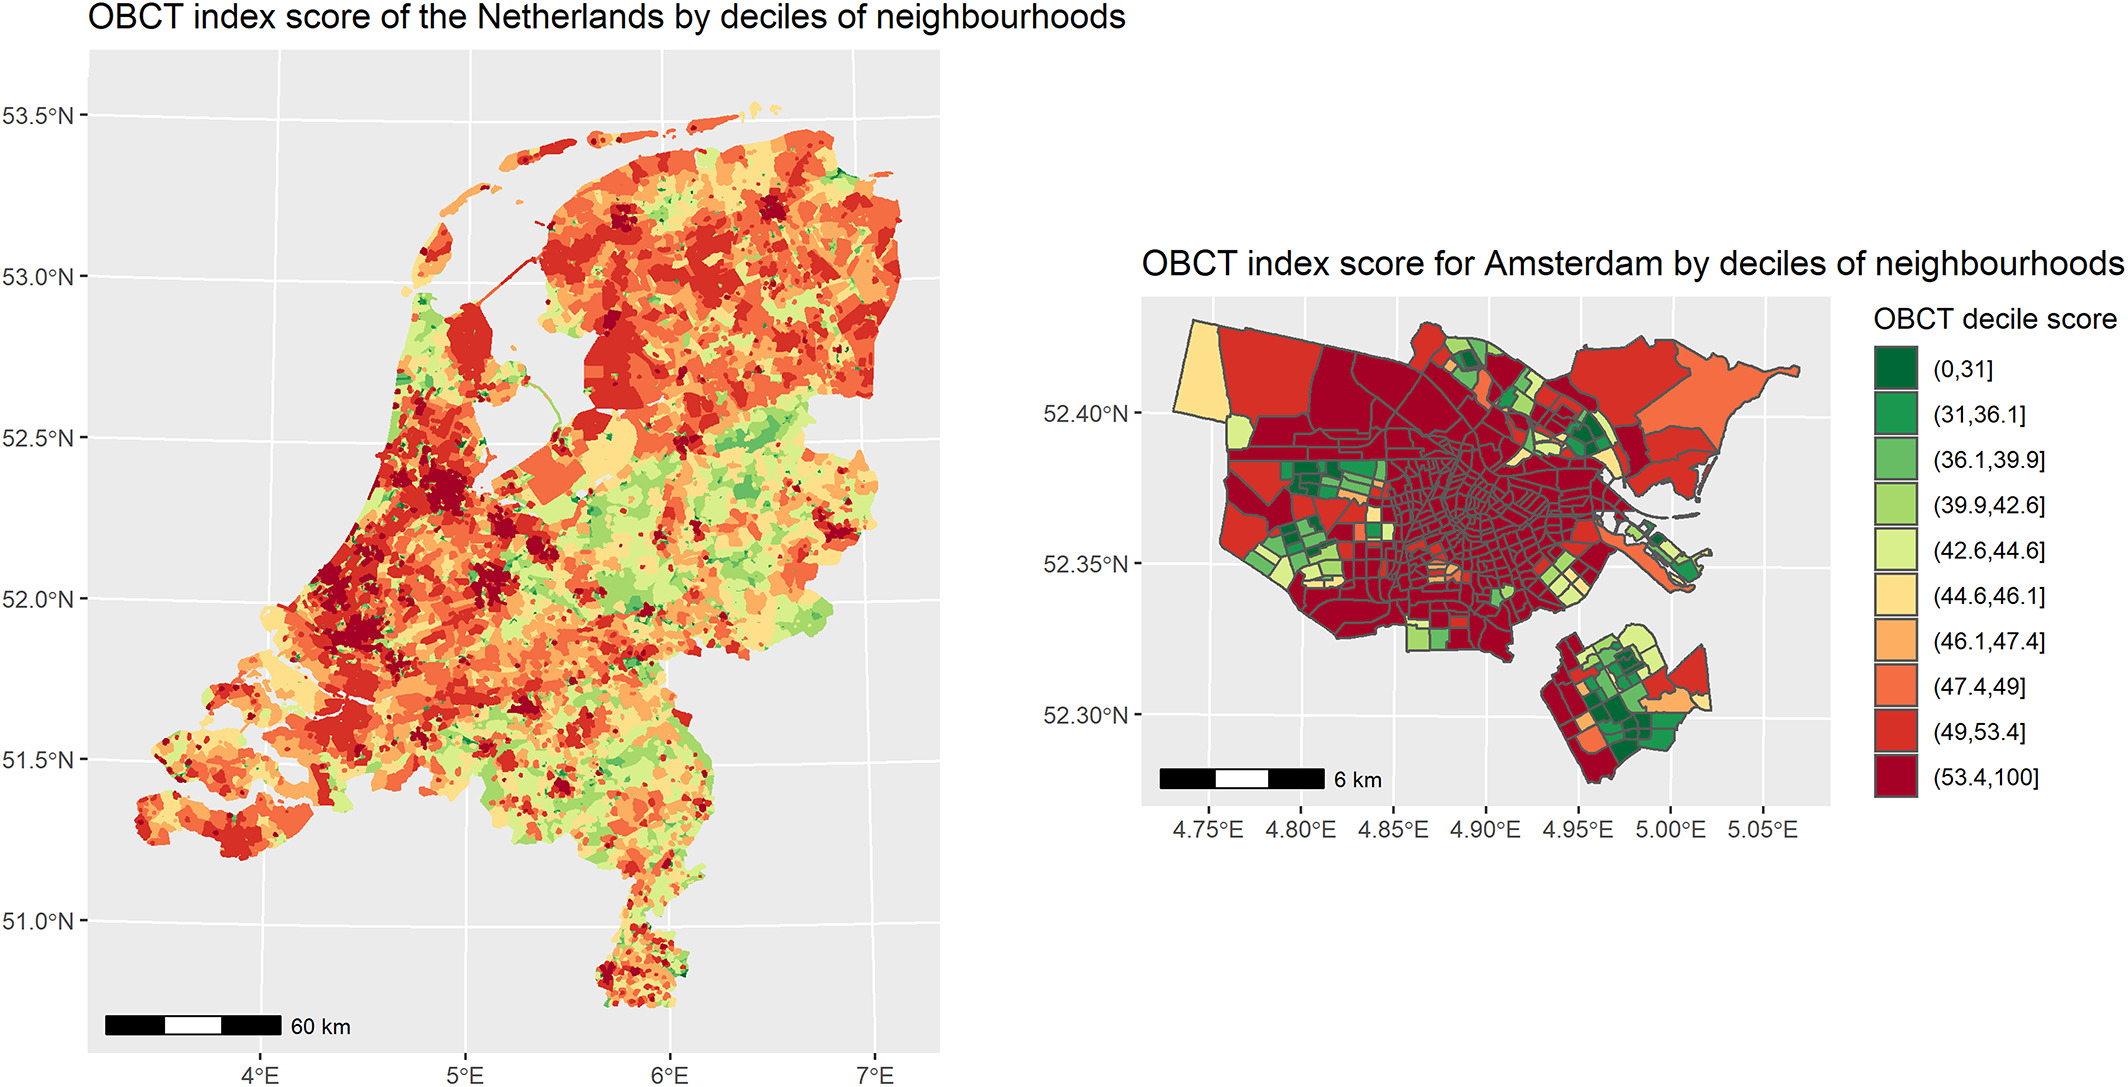 OBCT index score for all neighborhoods in the Netherlands (left) and the municipality of Amsterdam (right) in 2016. Darker red indicated higher obesogenicity. The score is graphically presented in deciles. OBCT, Obesogenic Built Environment CharacterisTics